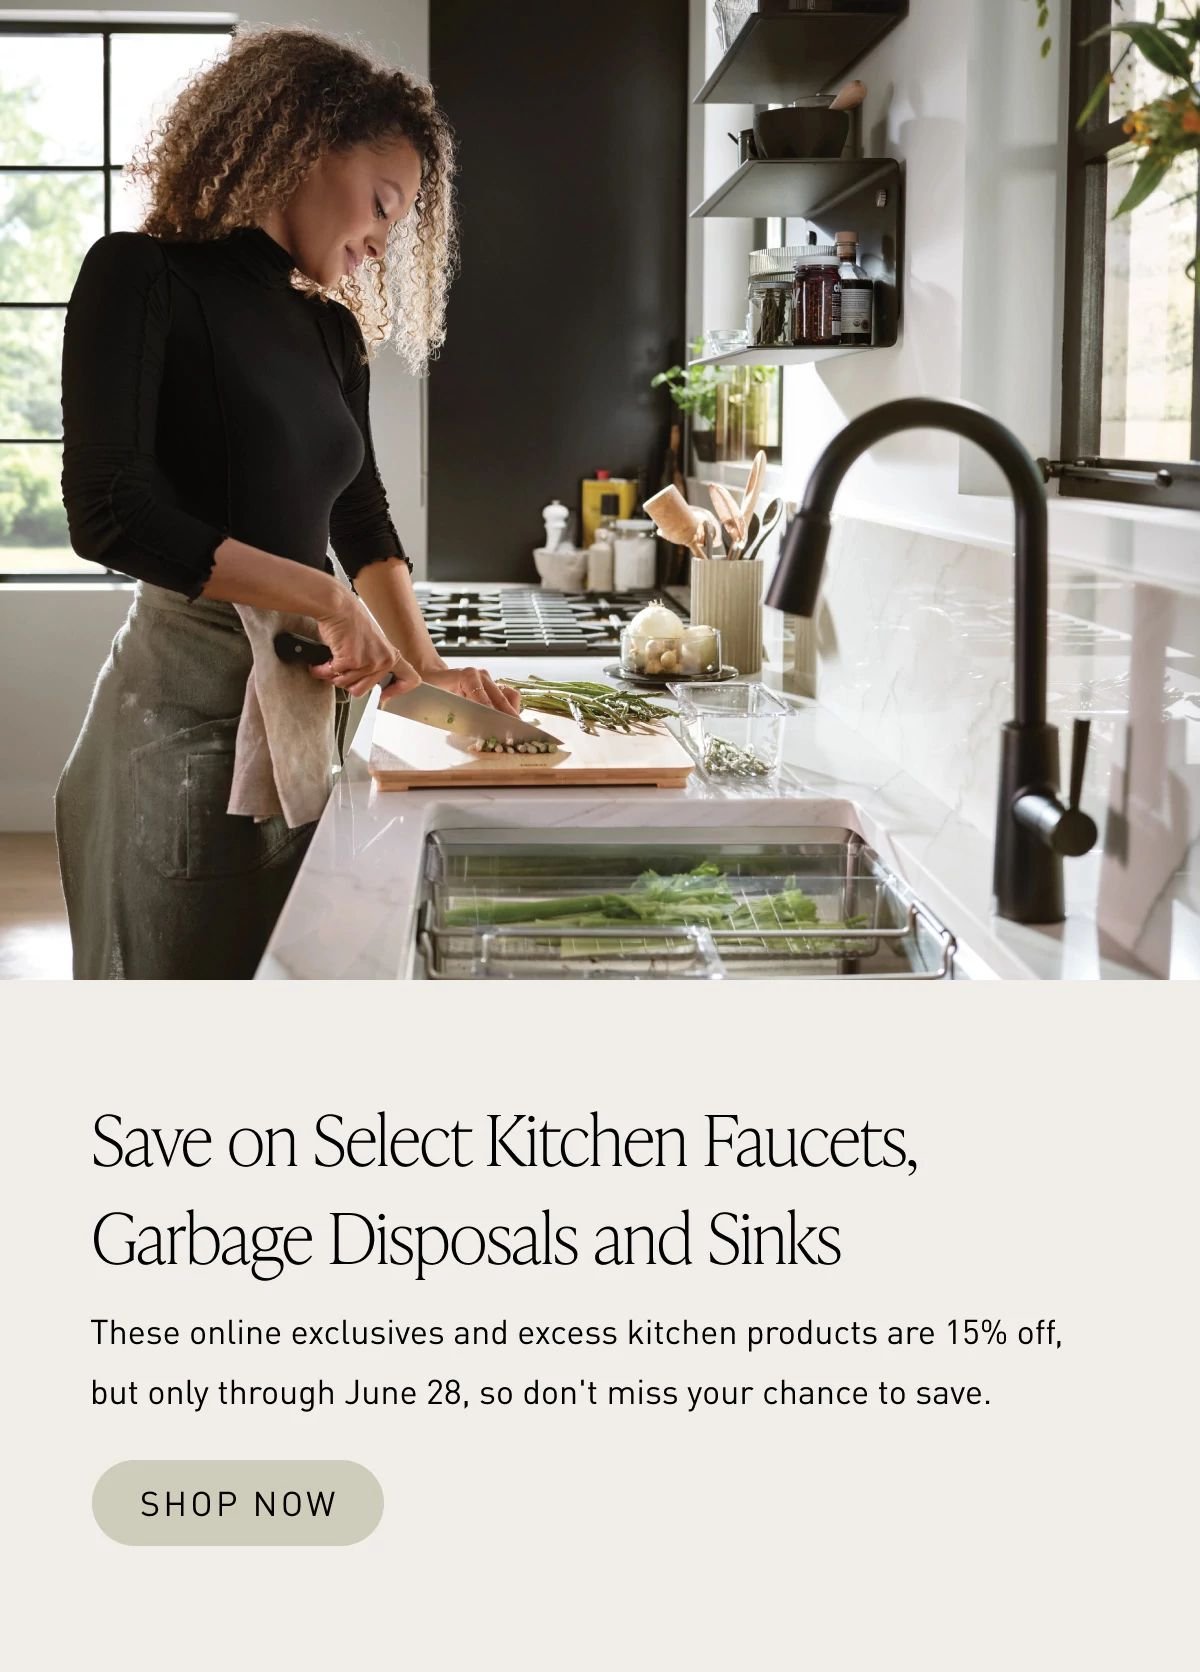 Save on select kitchen faucets, garbage disposals and sinks through June 28.